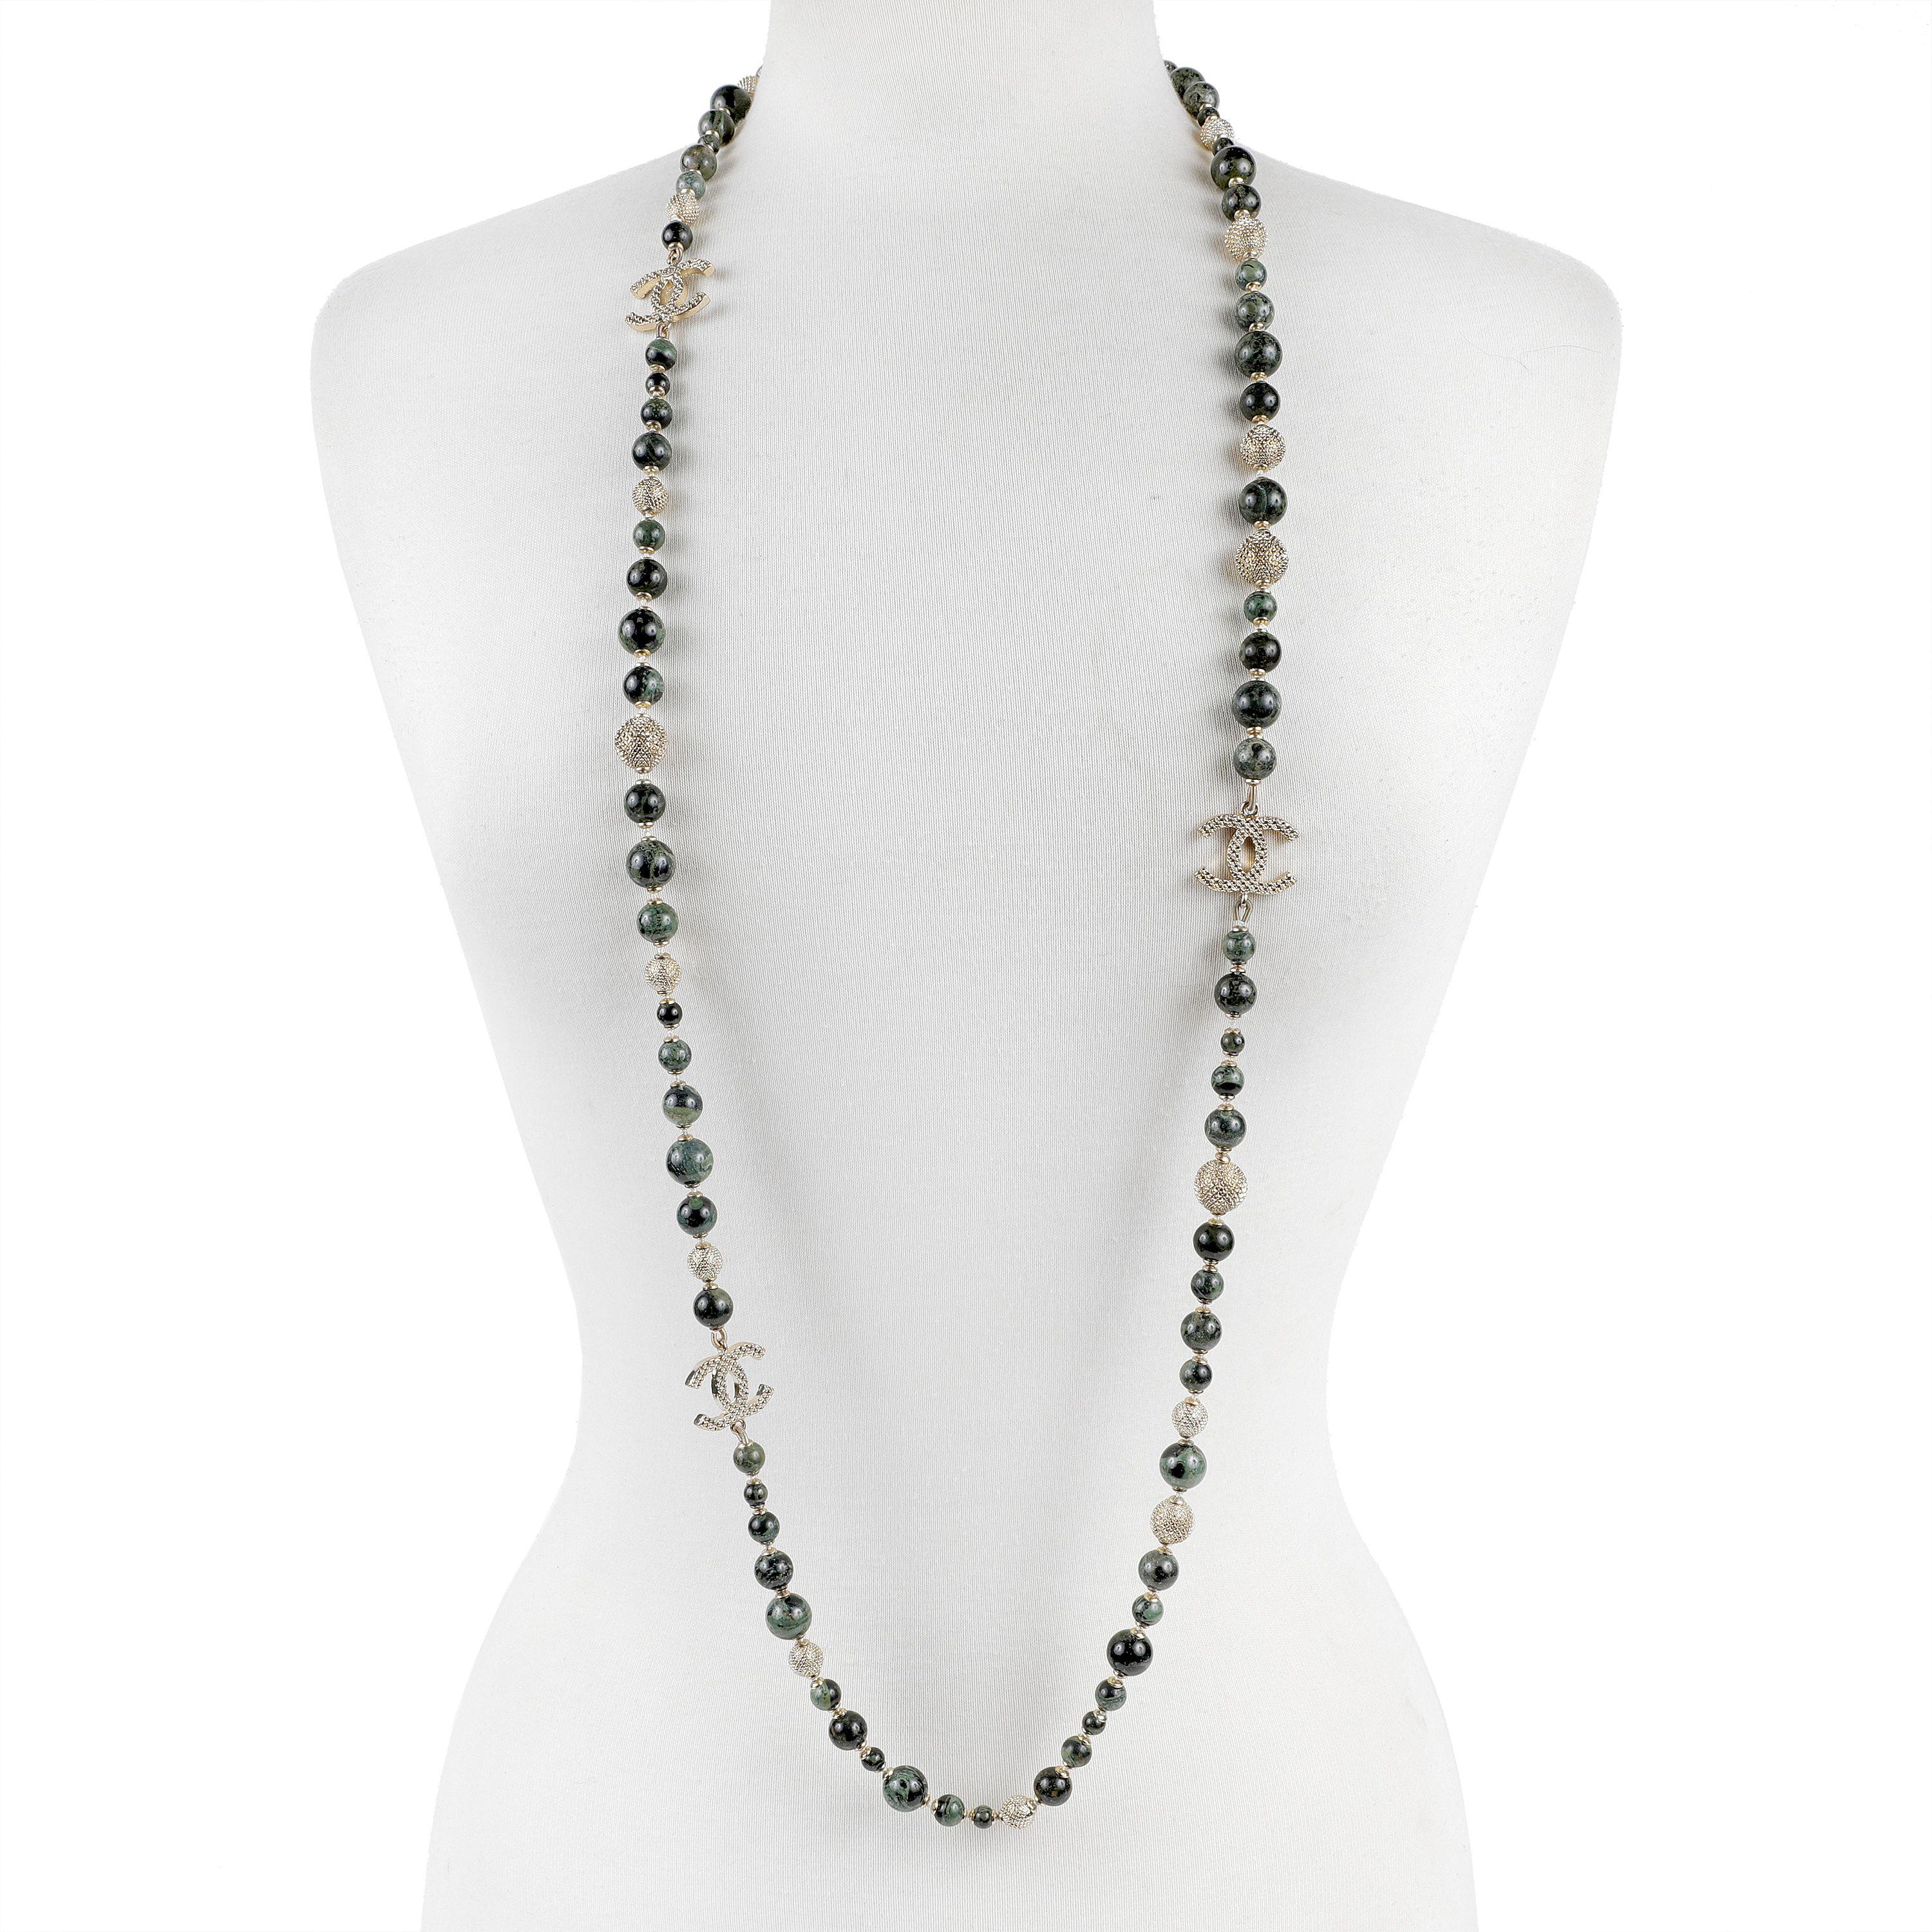 This authentic Chanel Onyx Bead CC Necklace is in pristine condition.  From the Byzantine Collection, it may be worn single or double.  Polished dark onyx stones interspersed with quilted beads and interlocking CC’s.  Adjustable length. 

PBF 12551
